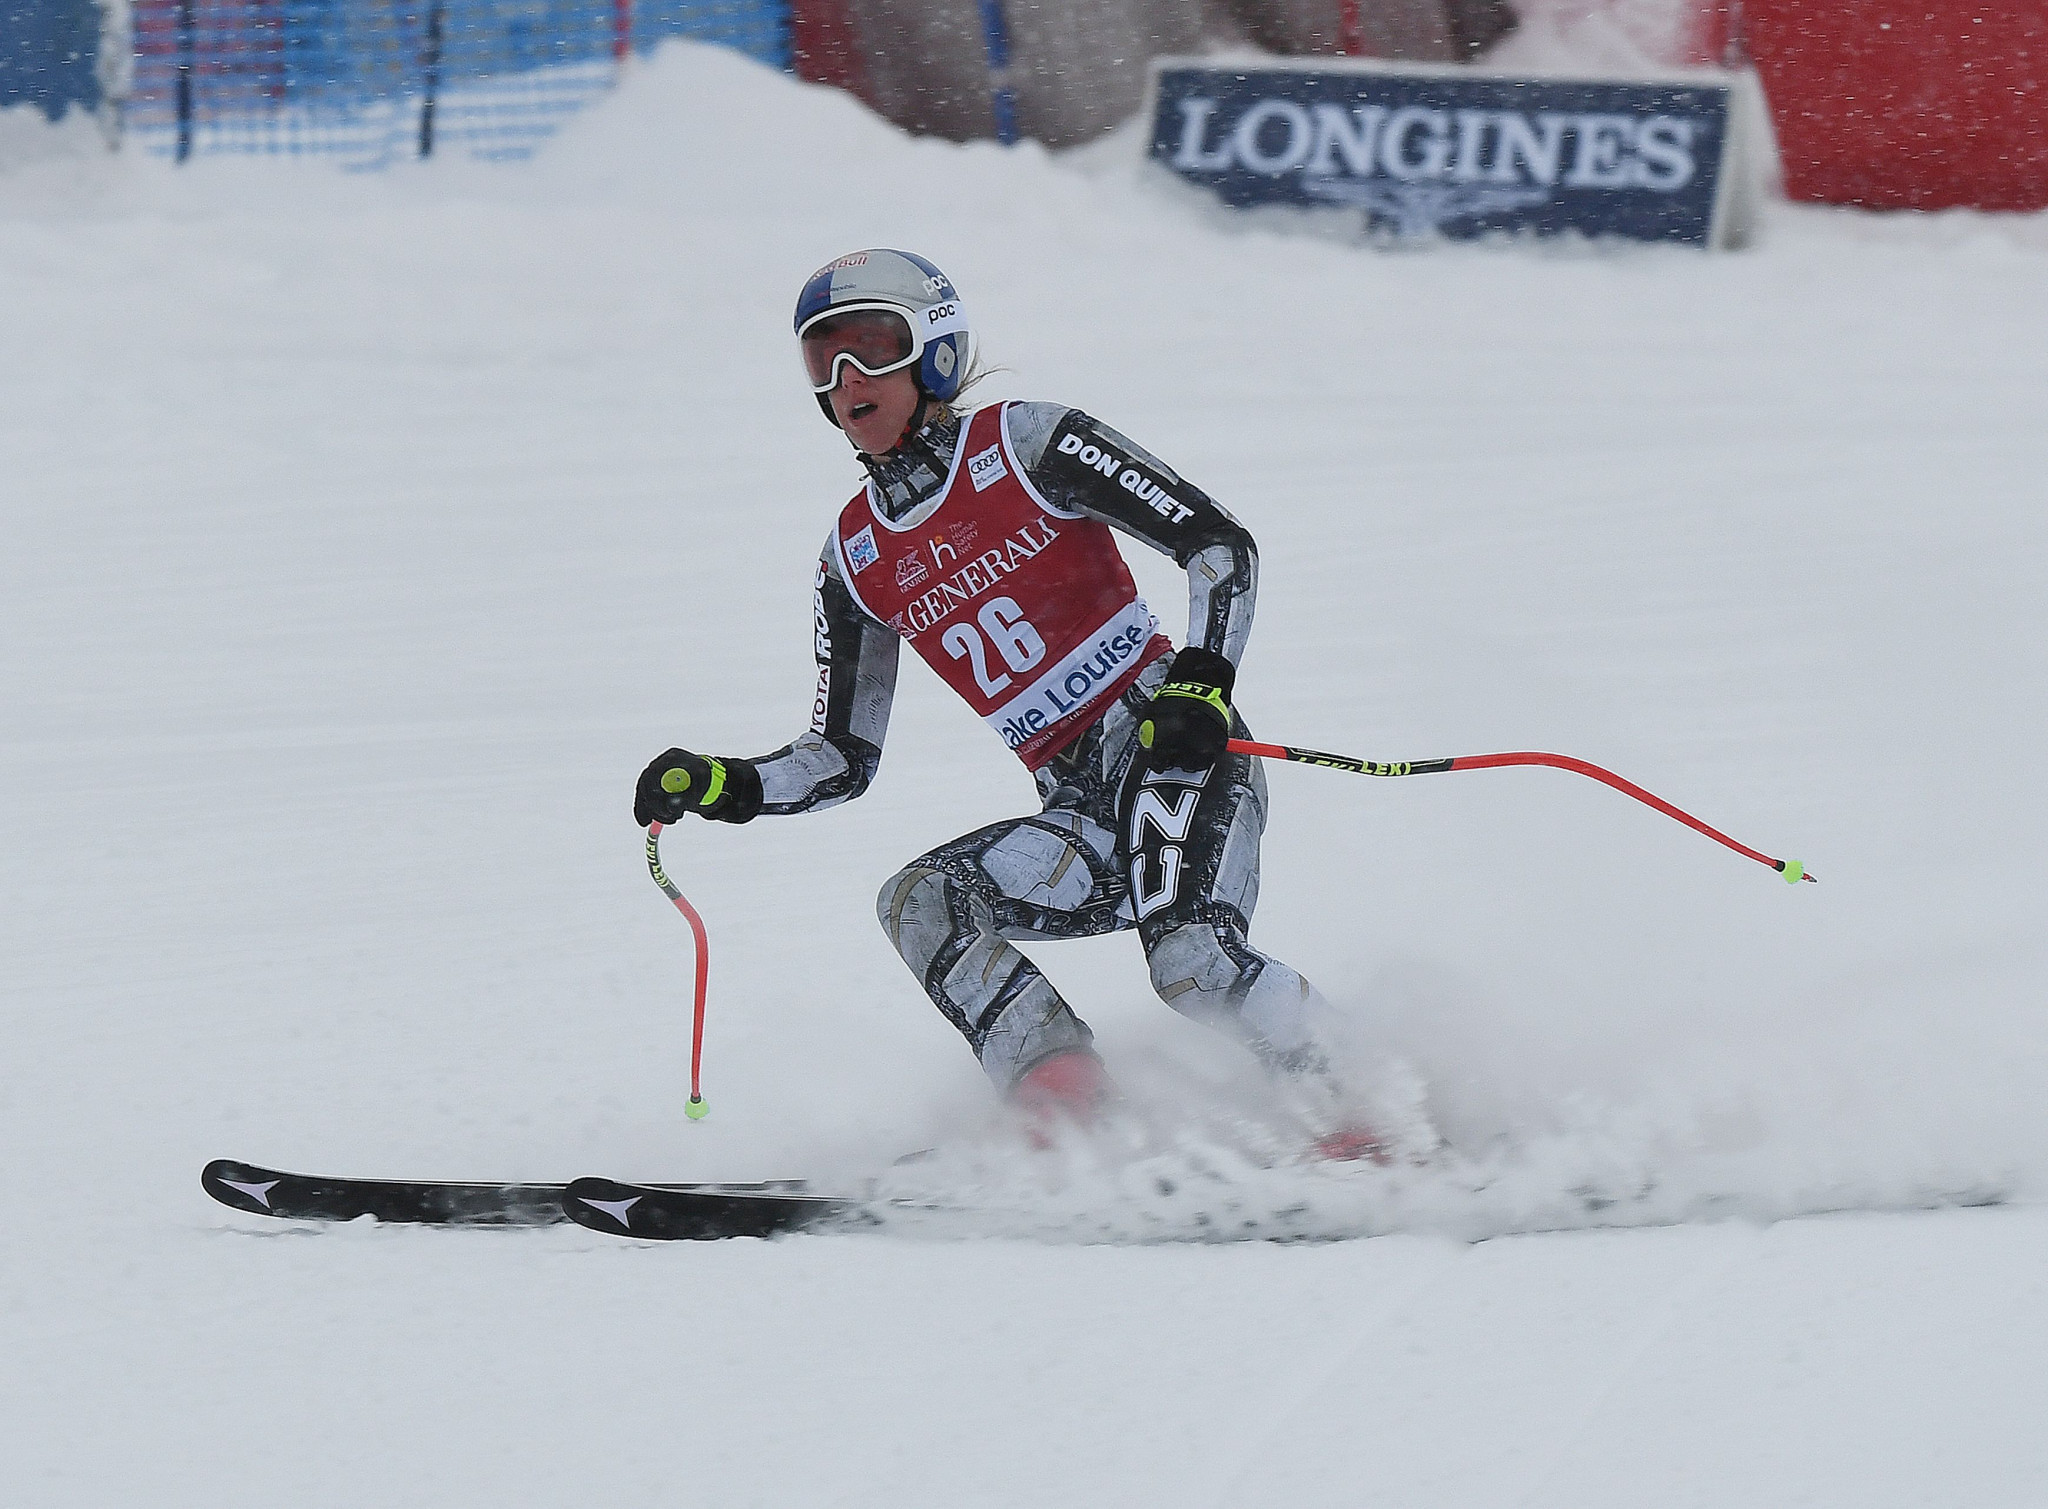 Ledecká claims downhill gold at FIS Alpine Ski World Cup in Lake Louise